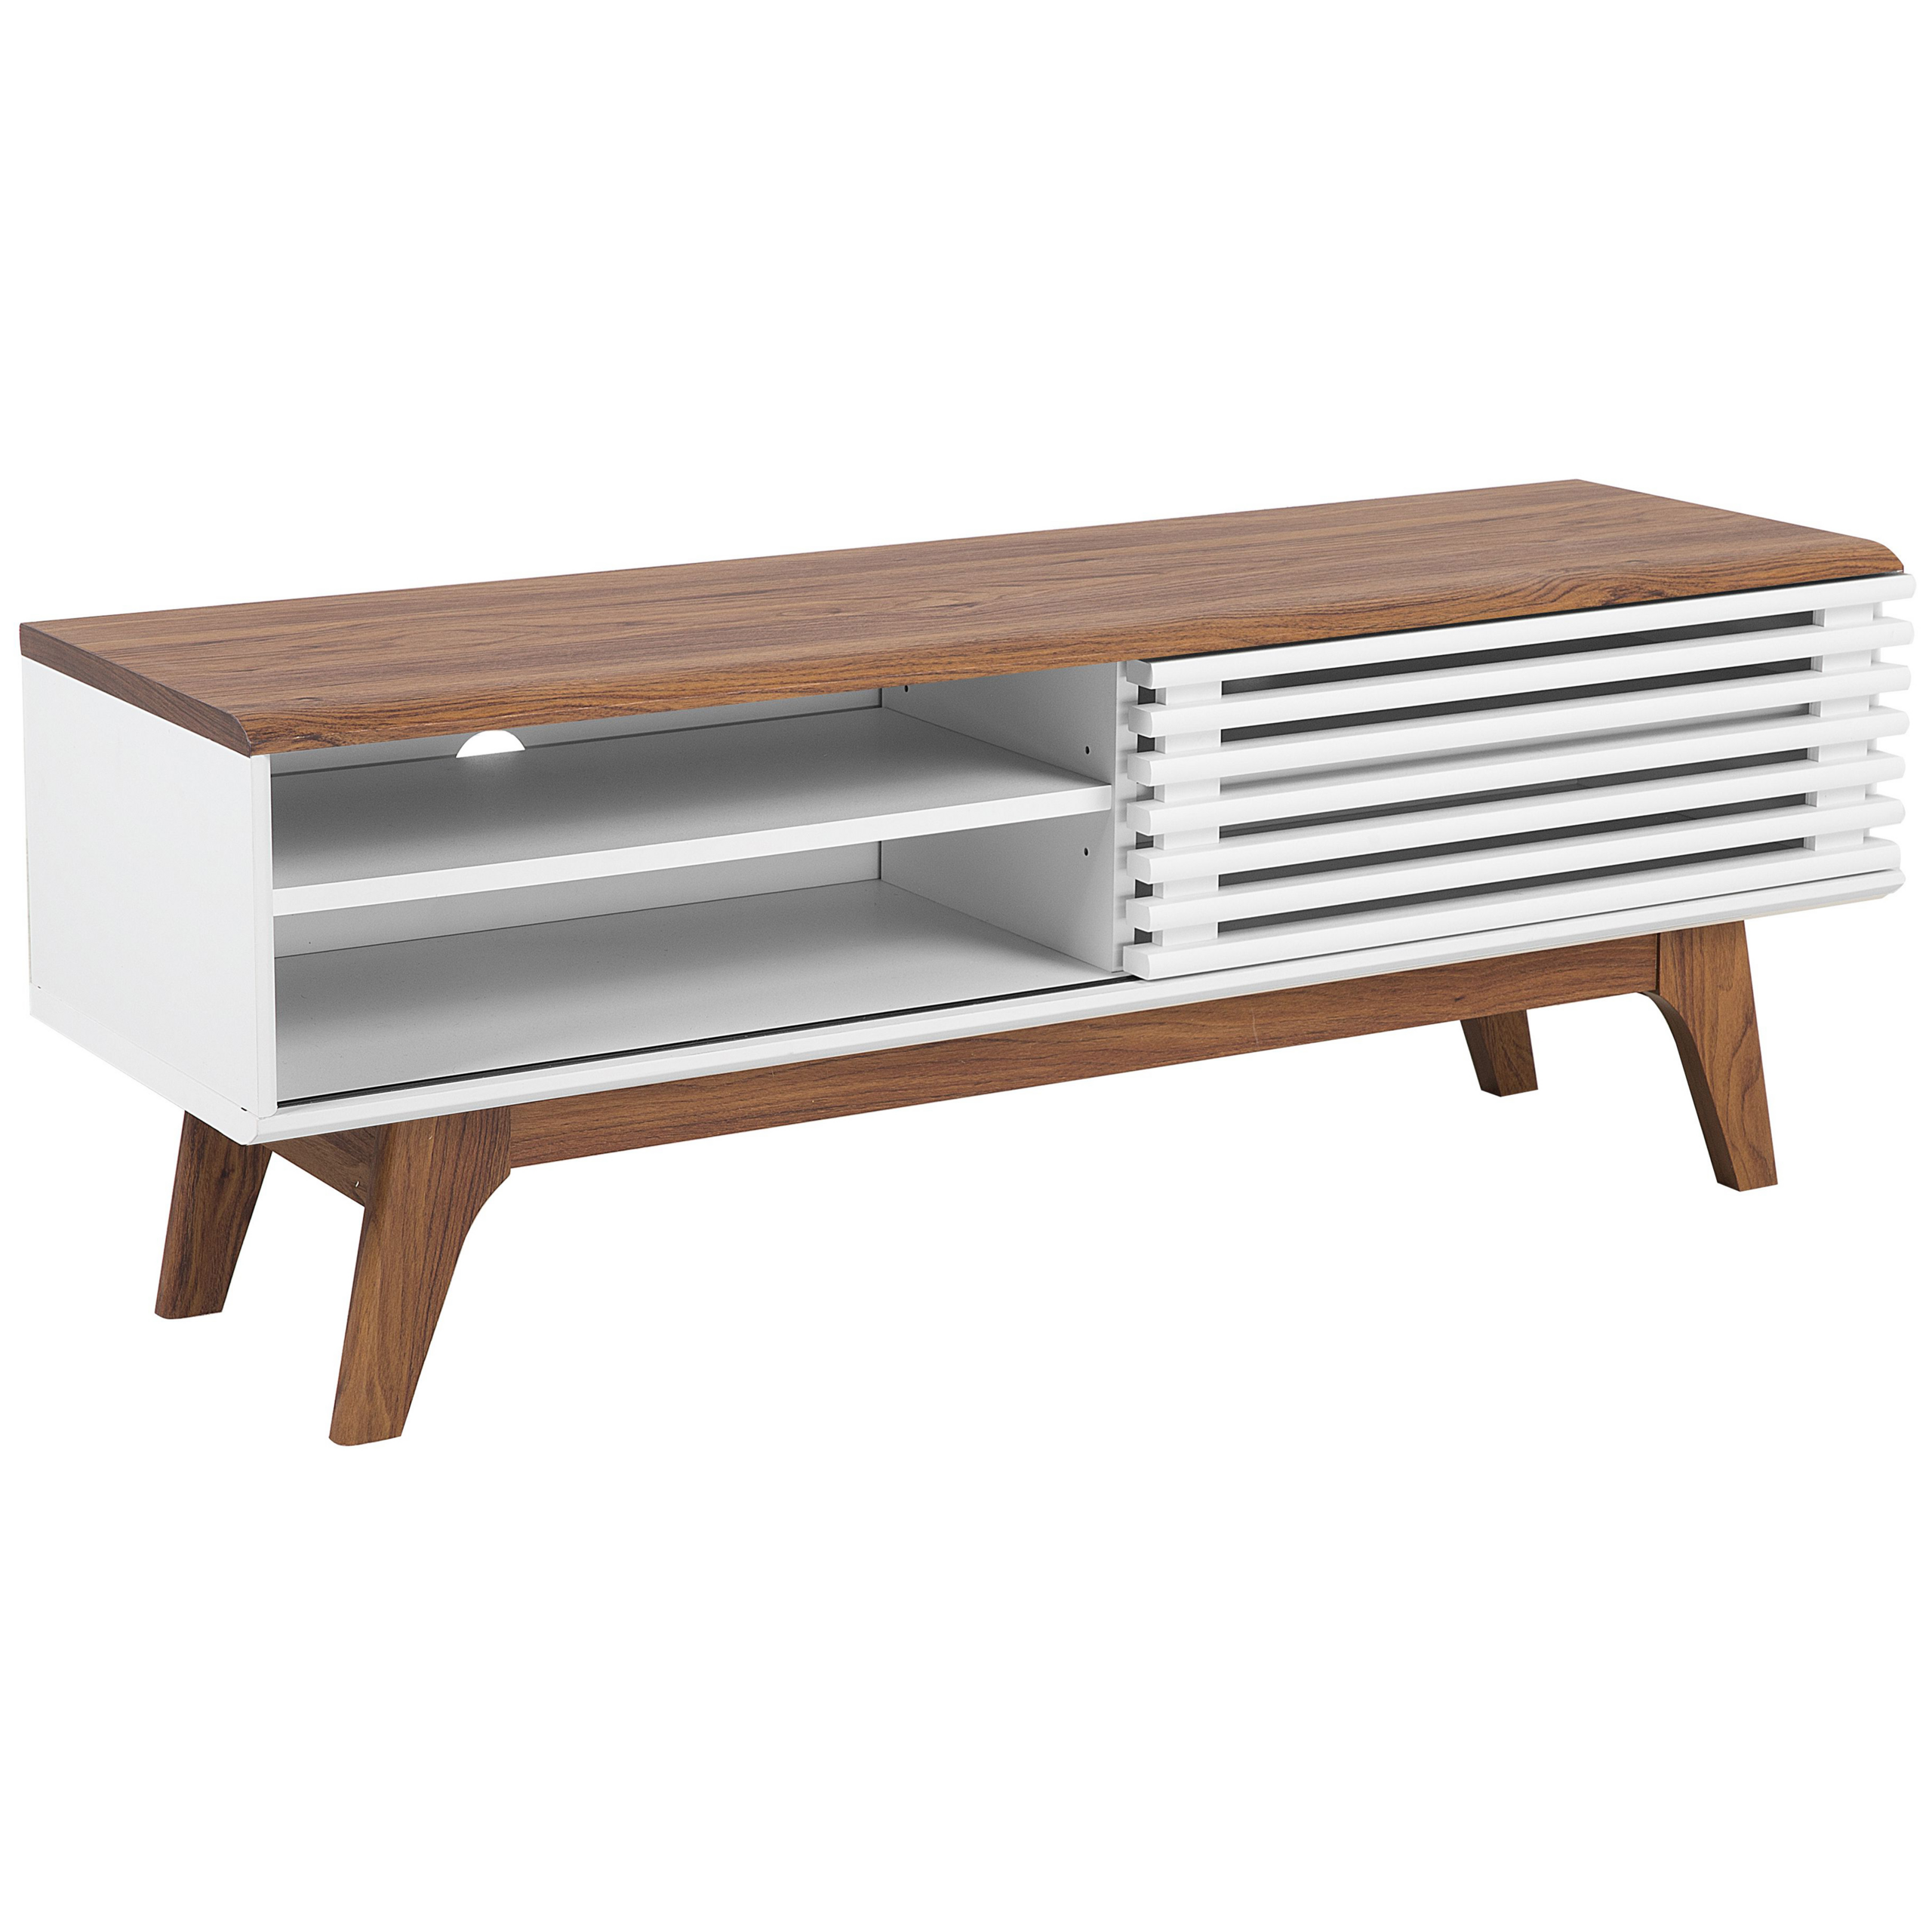 Beliani TV Stand Dark Wood White TV Up To 53ʺ Recommended 4 Shelves Cable Management Modern